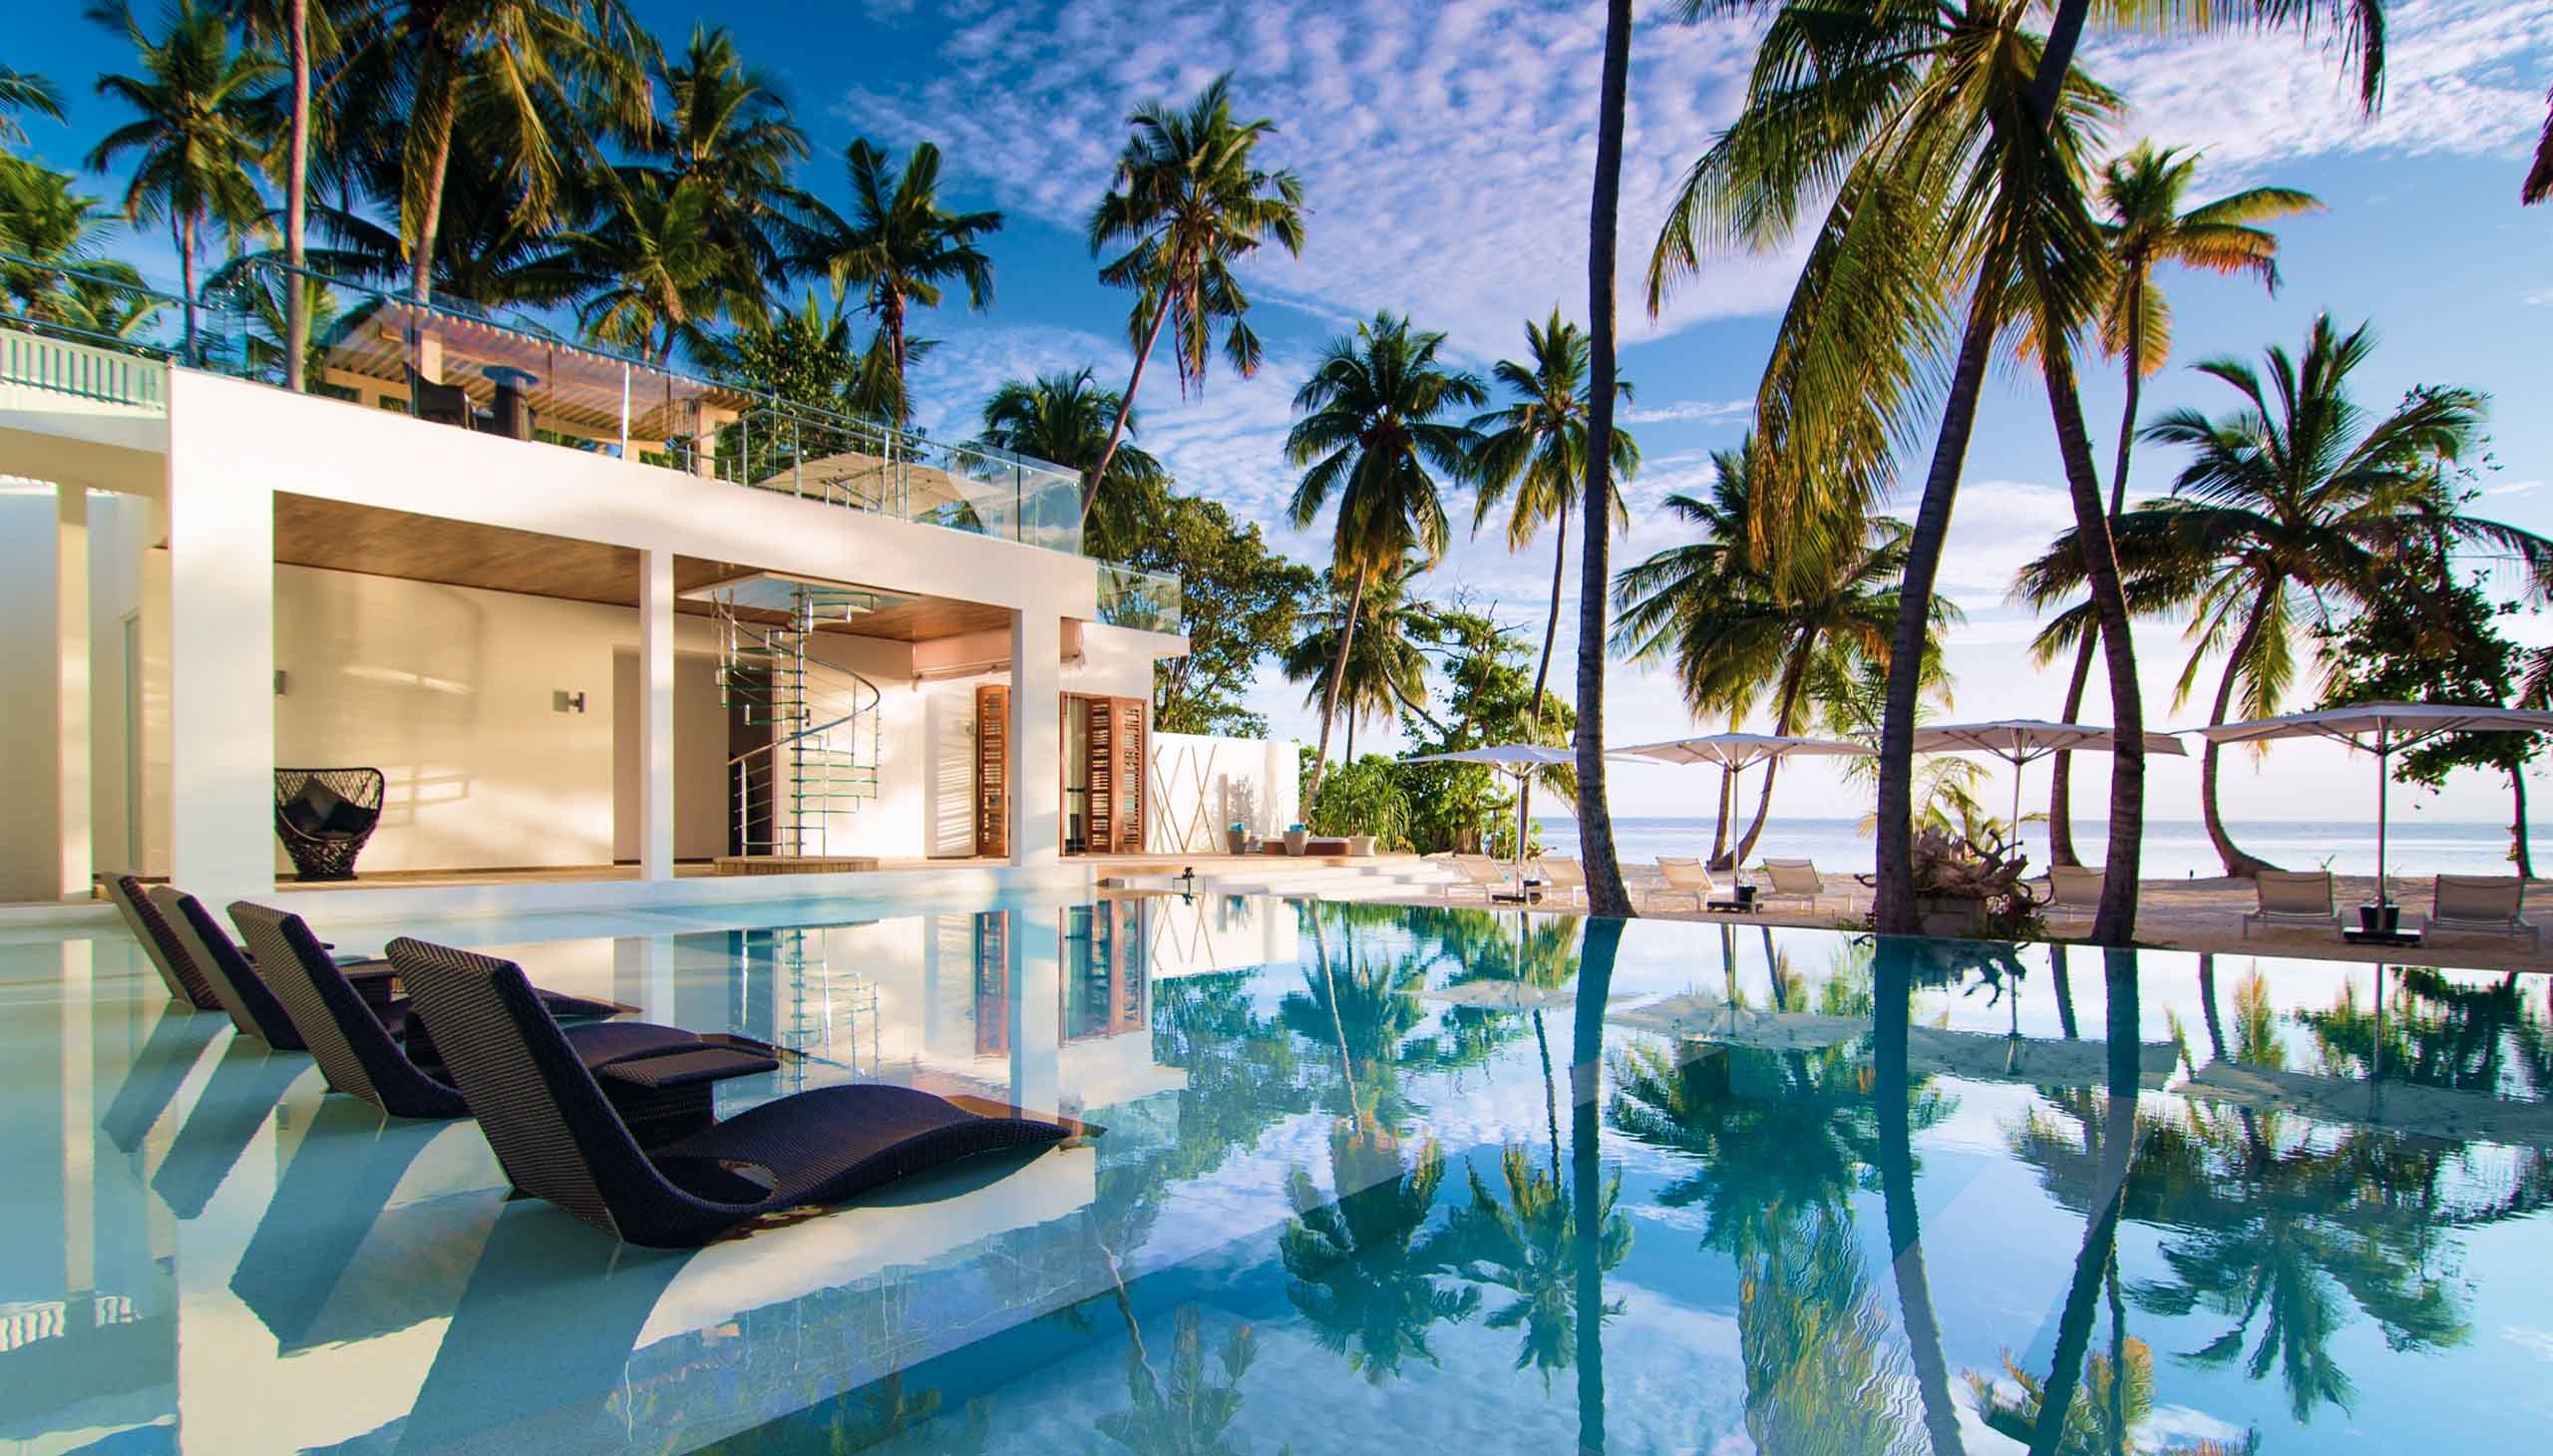 Poolside view of the Amilla Estate - Mansion in the Maldives